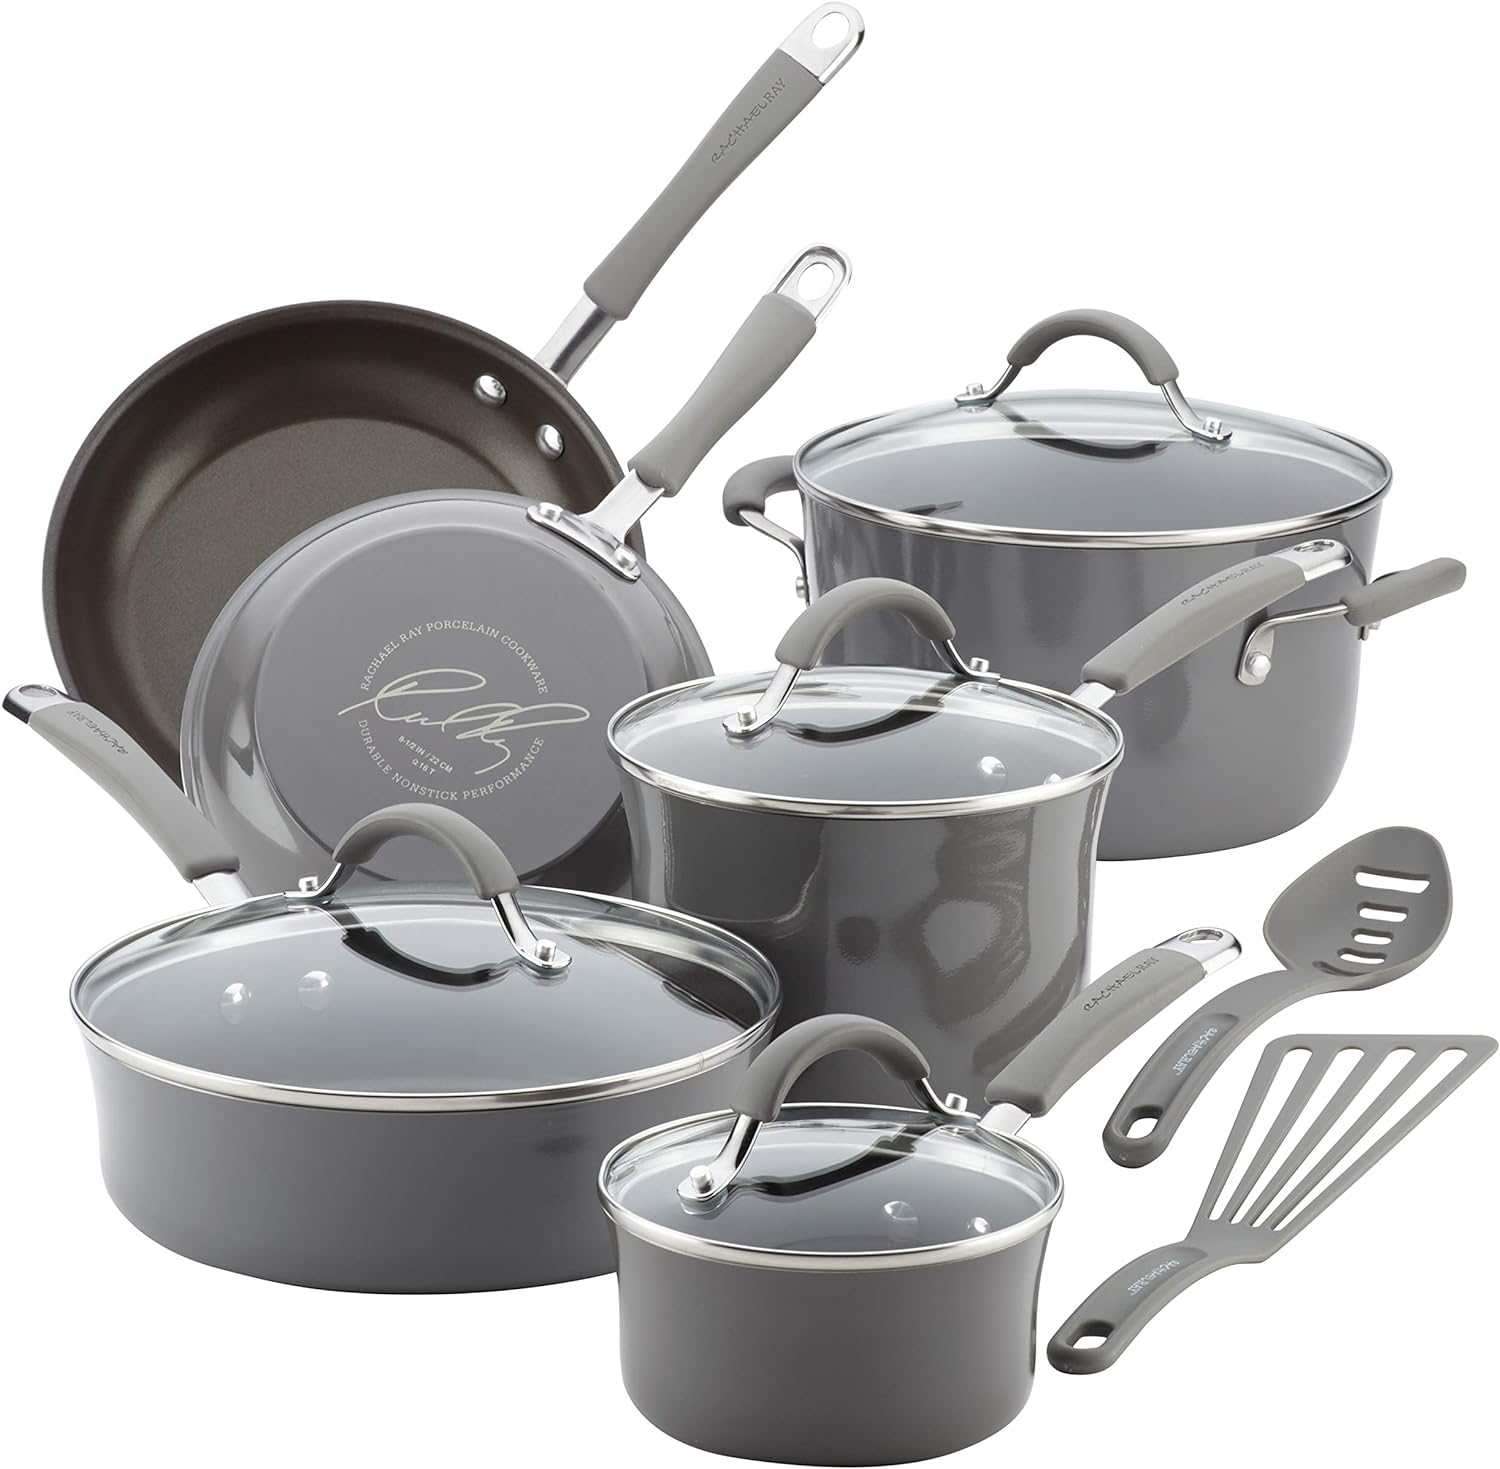 Rachael Ray Nonstick Cookware Review